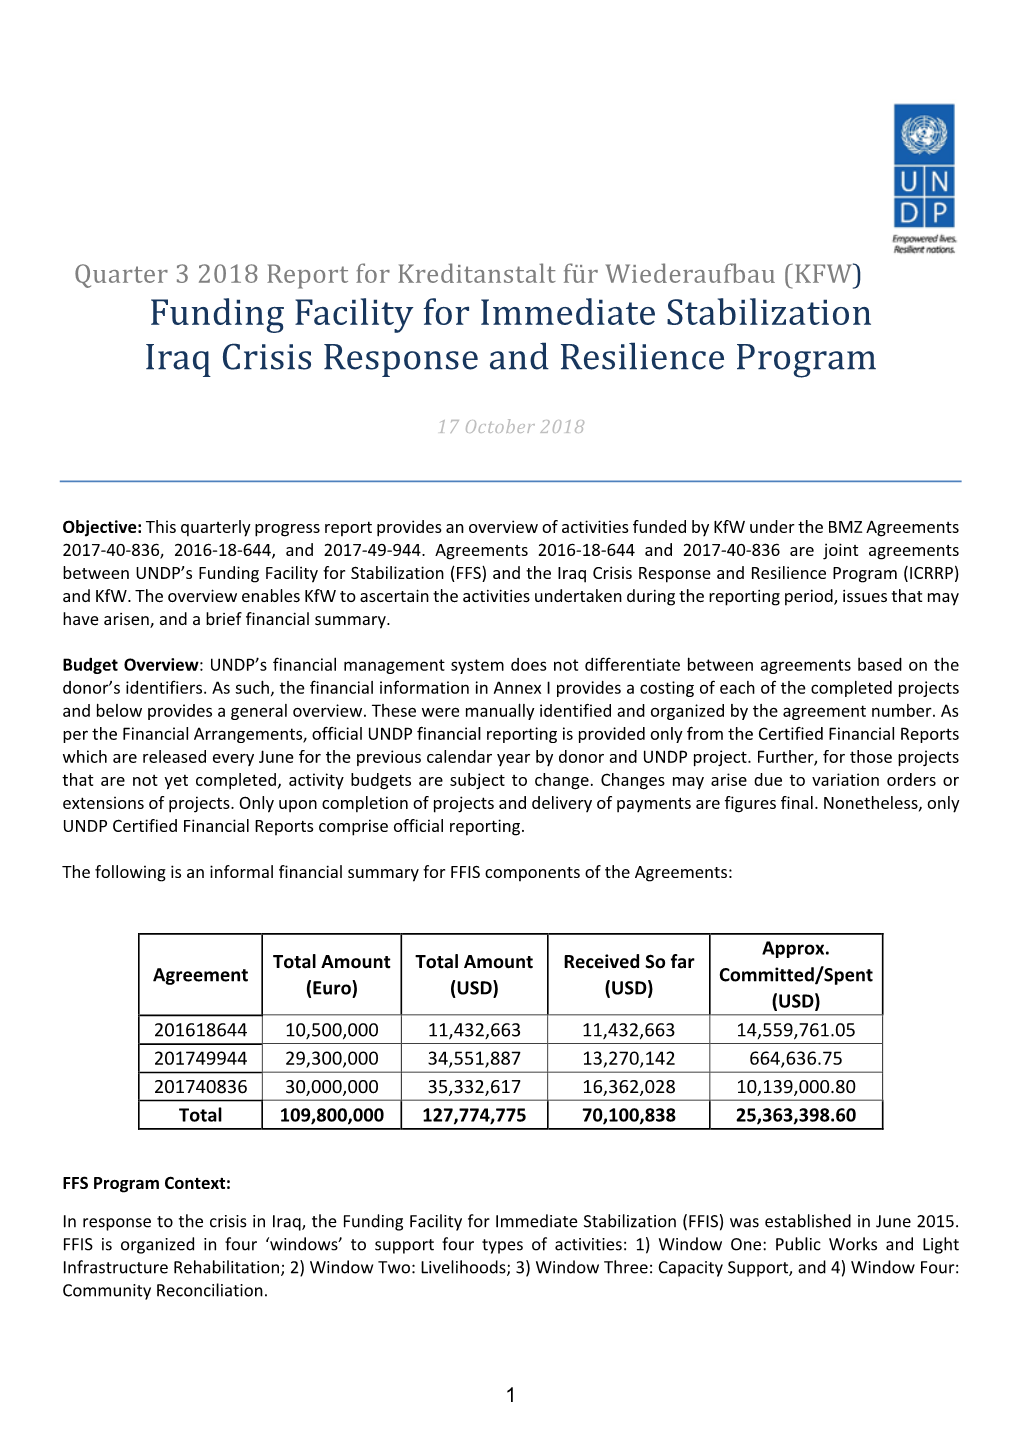 (KFW) Funding Facility for Immediate Stabilization Iraq Crisis Response and Resilience Program